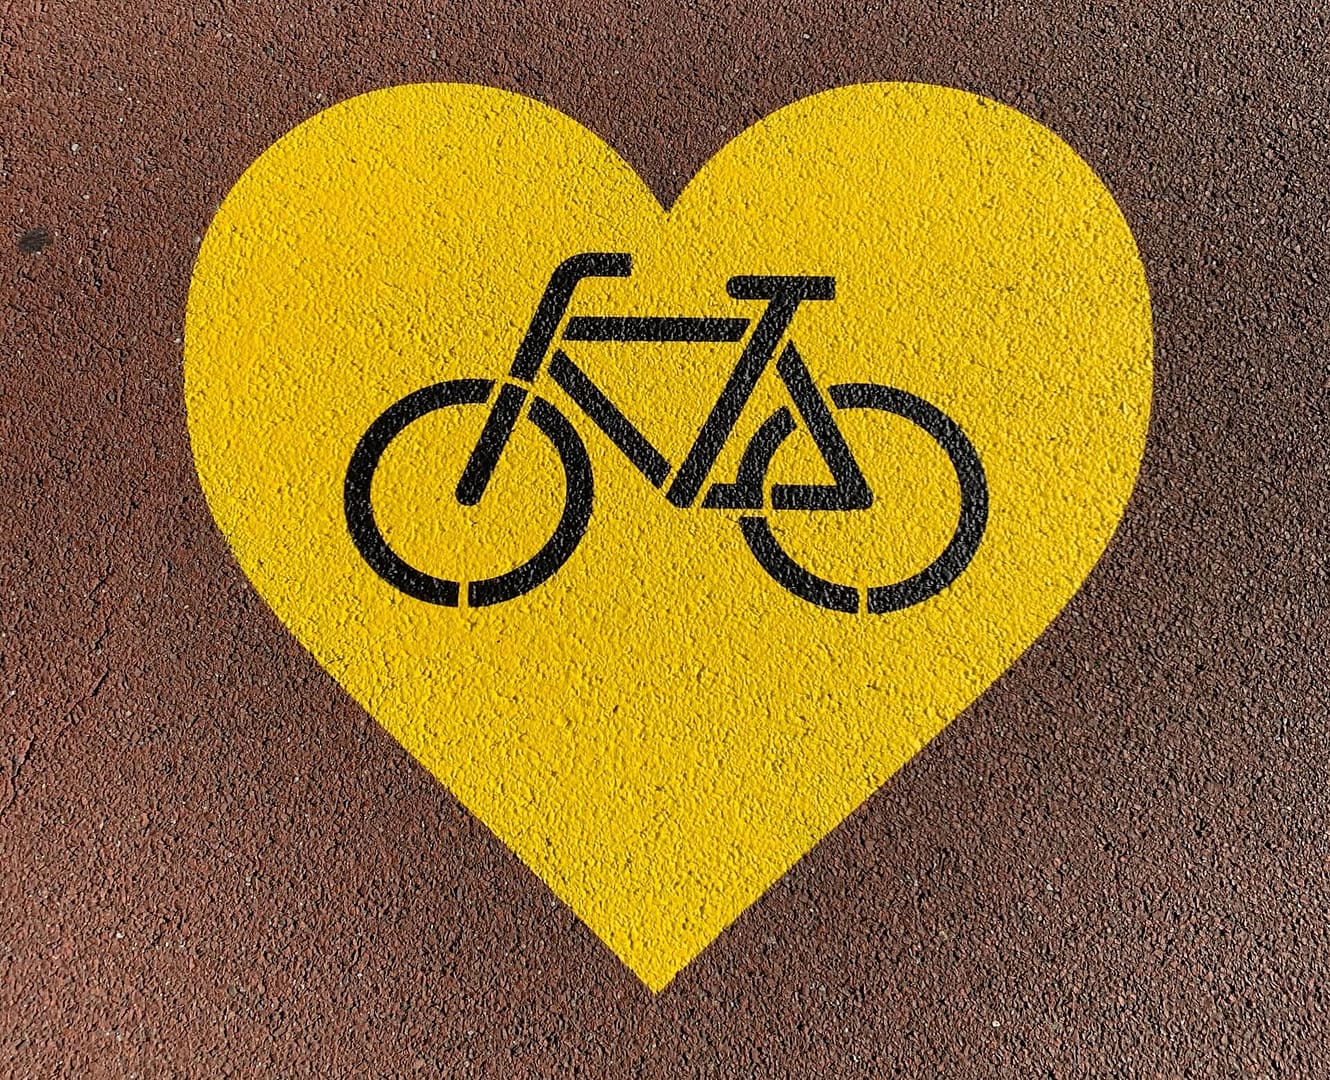 a bicycle in a yellow hear spray painted on a road